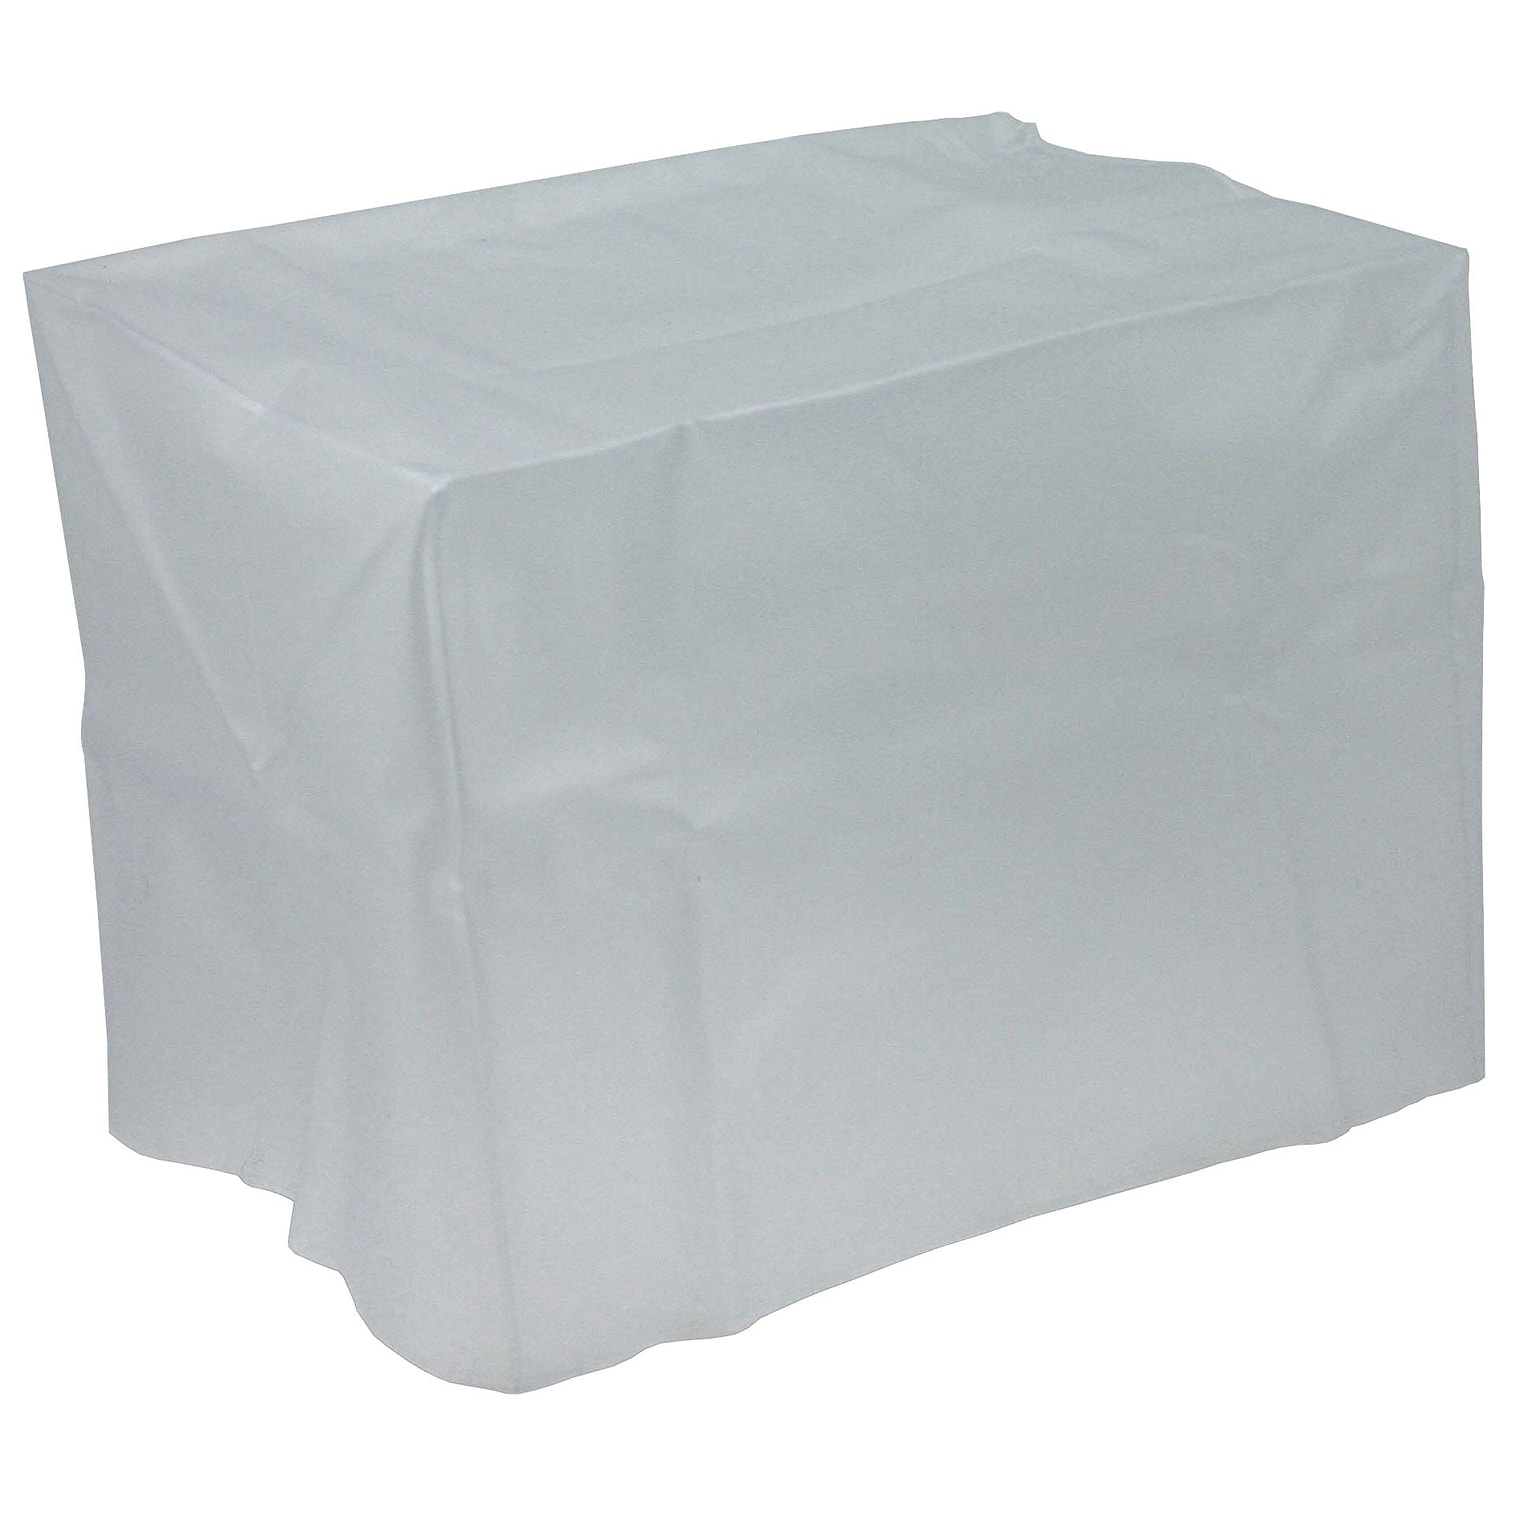 Cassida Dust Cover, 8.5H x 8W x 12L (A-DUST)